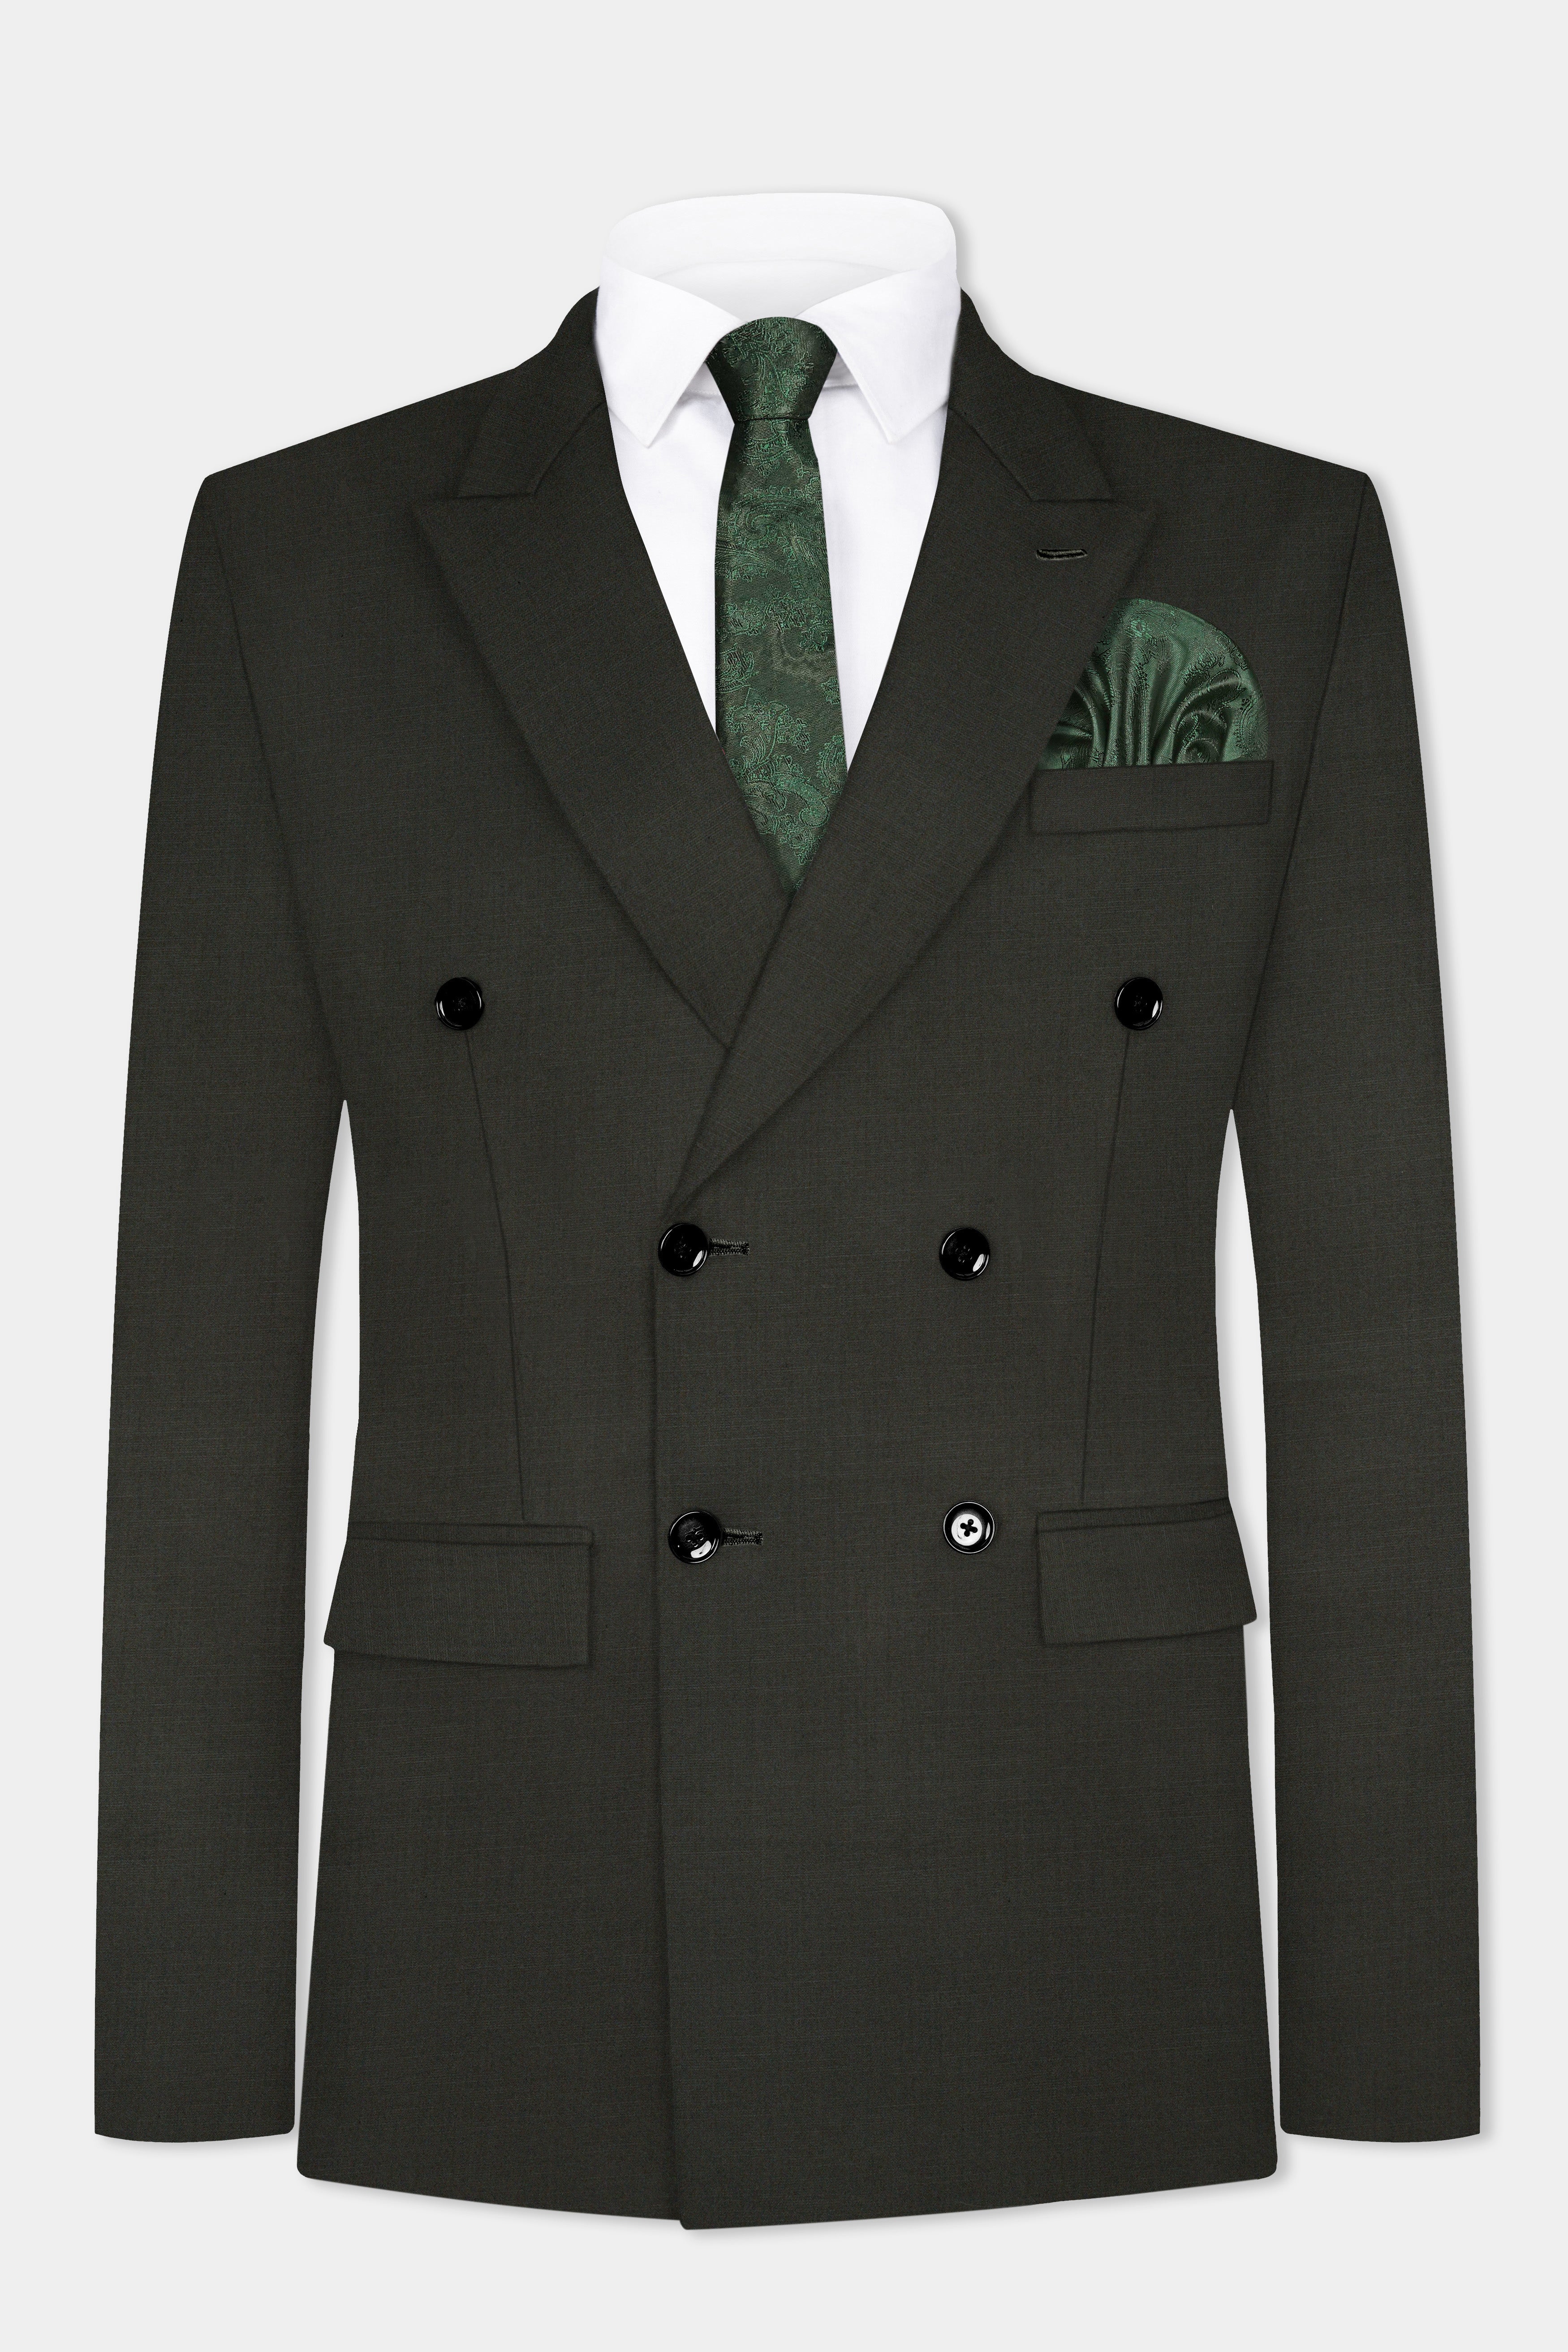 Rangoon Green Wool Blend Double Breasted Suit